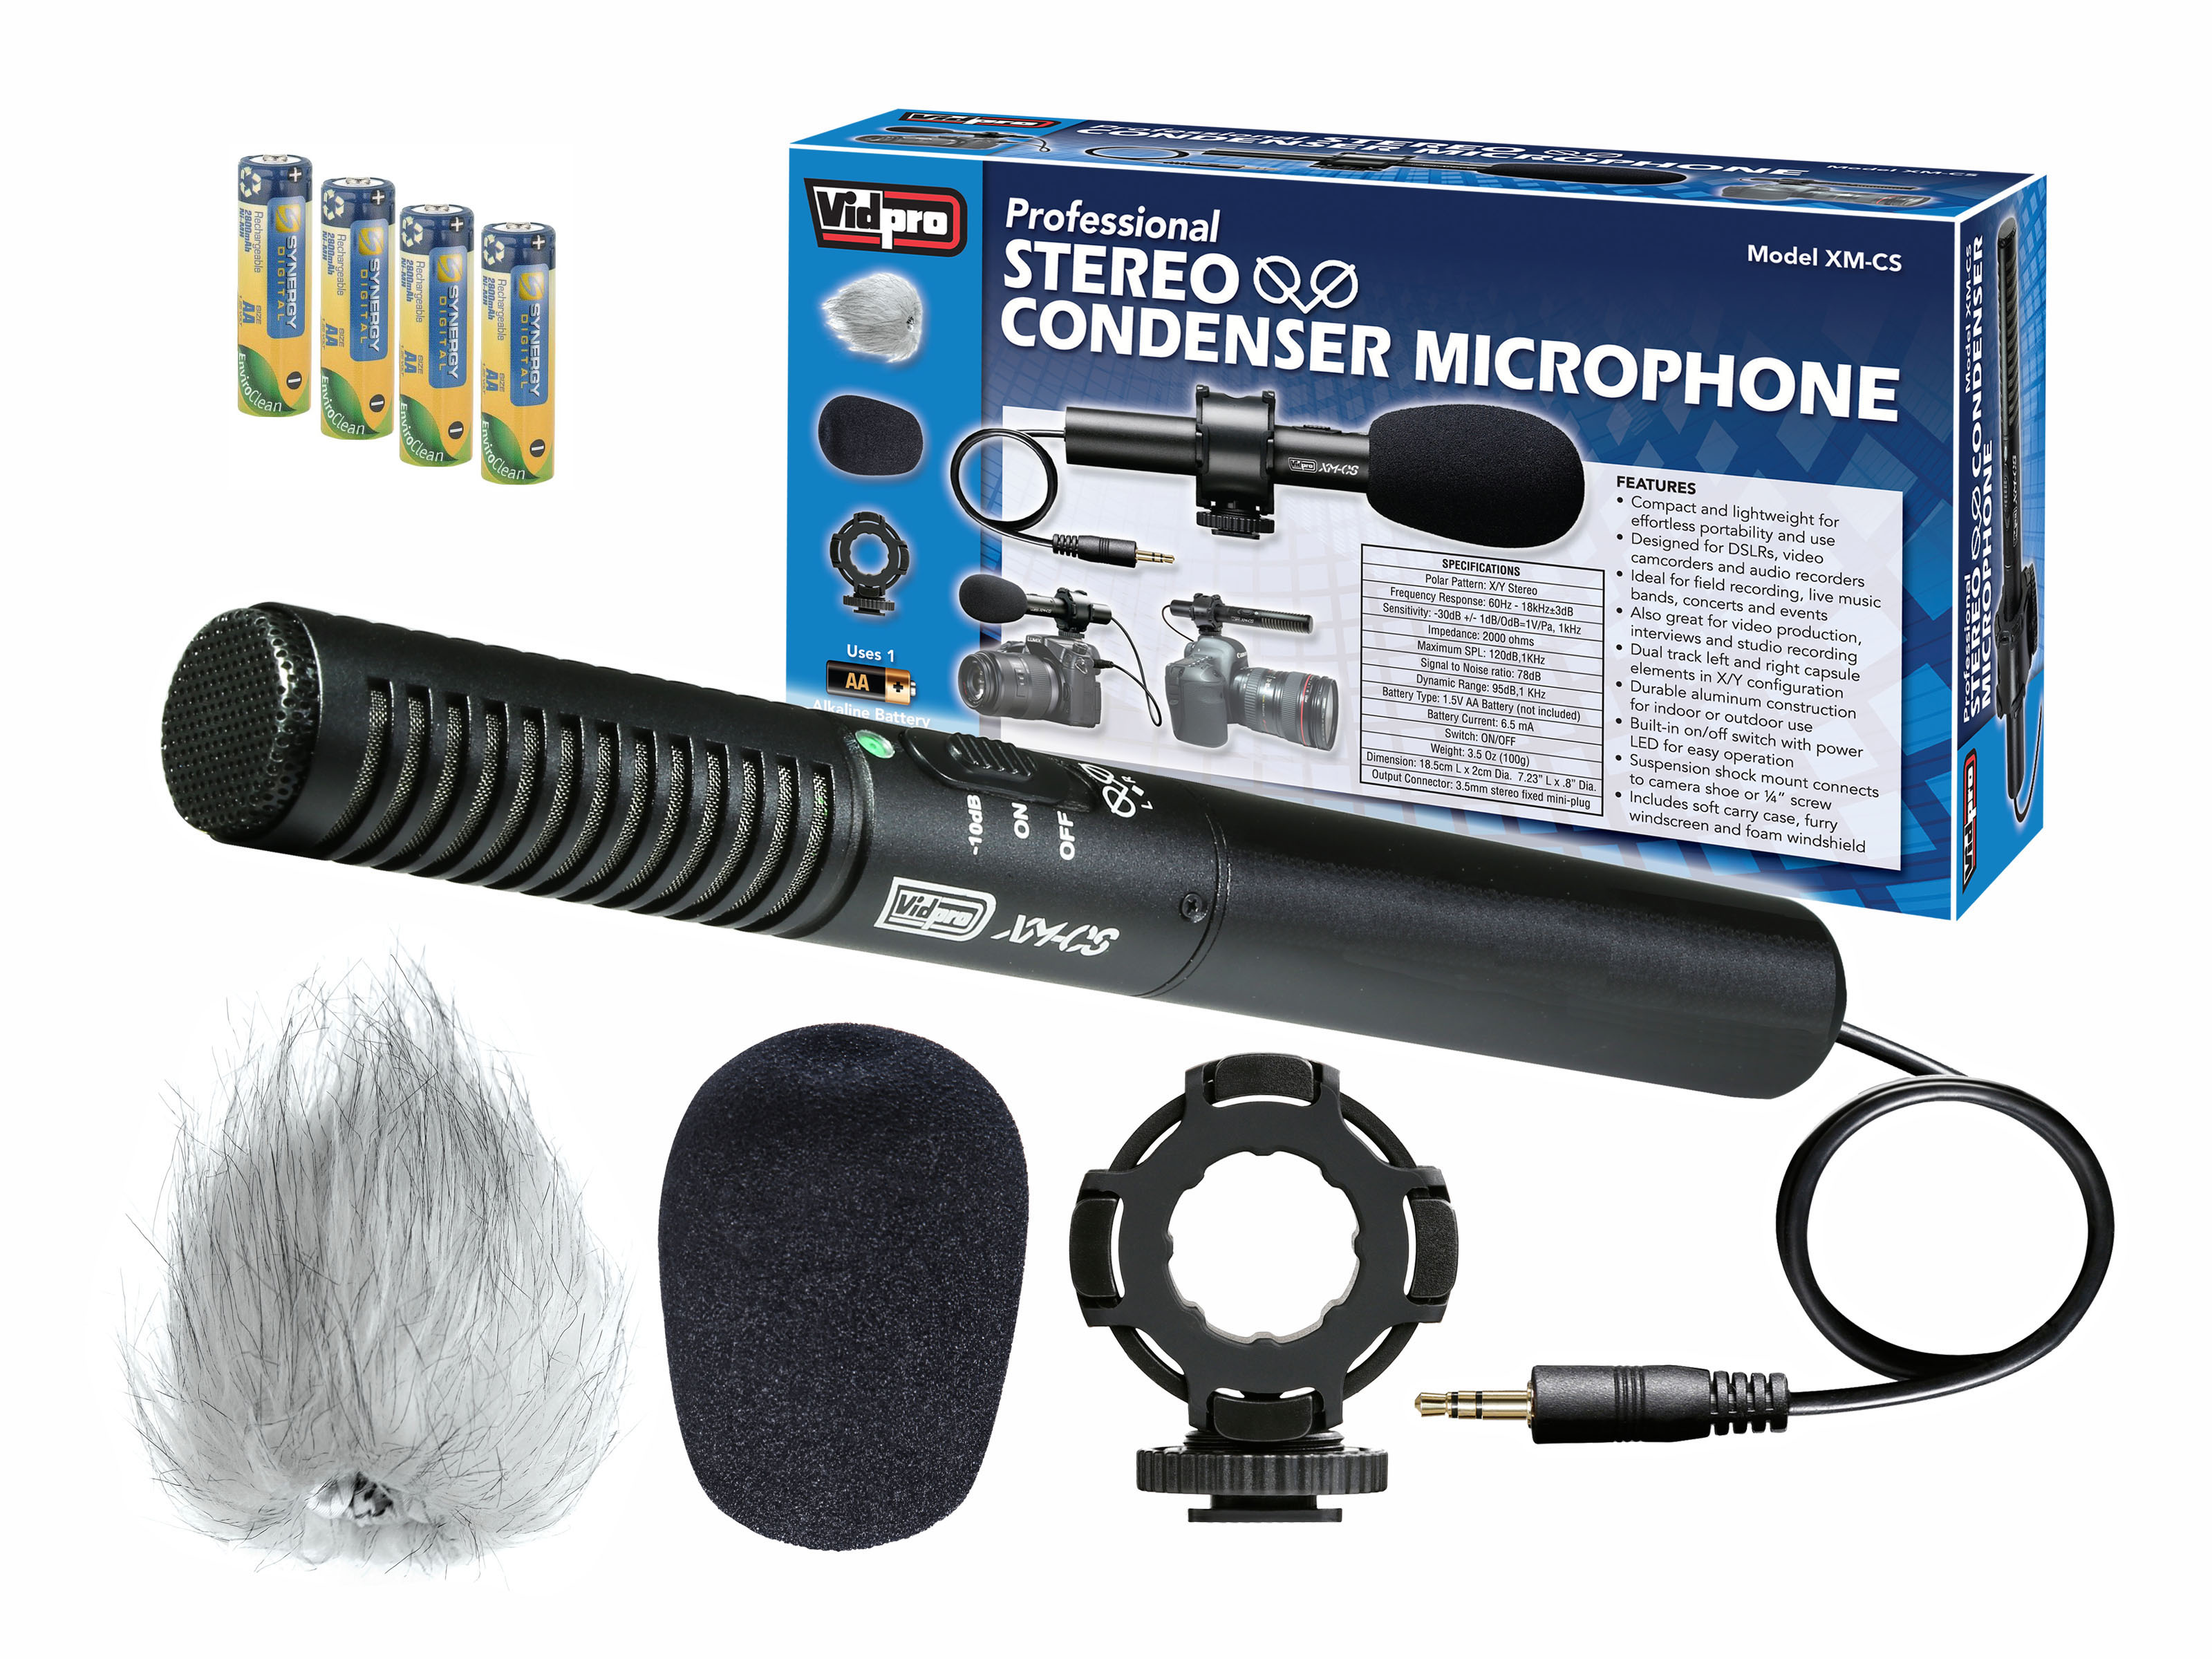 Vidpro XM-CS Condenser Stereo XY Microphone Kit  for DSLRs, video camcorders and audio recorders - With a Pack of 4 AA NiMH Rechargable Batteries - 2800mAh